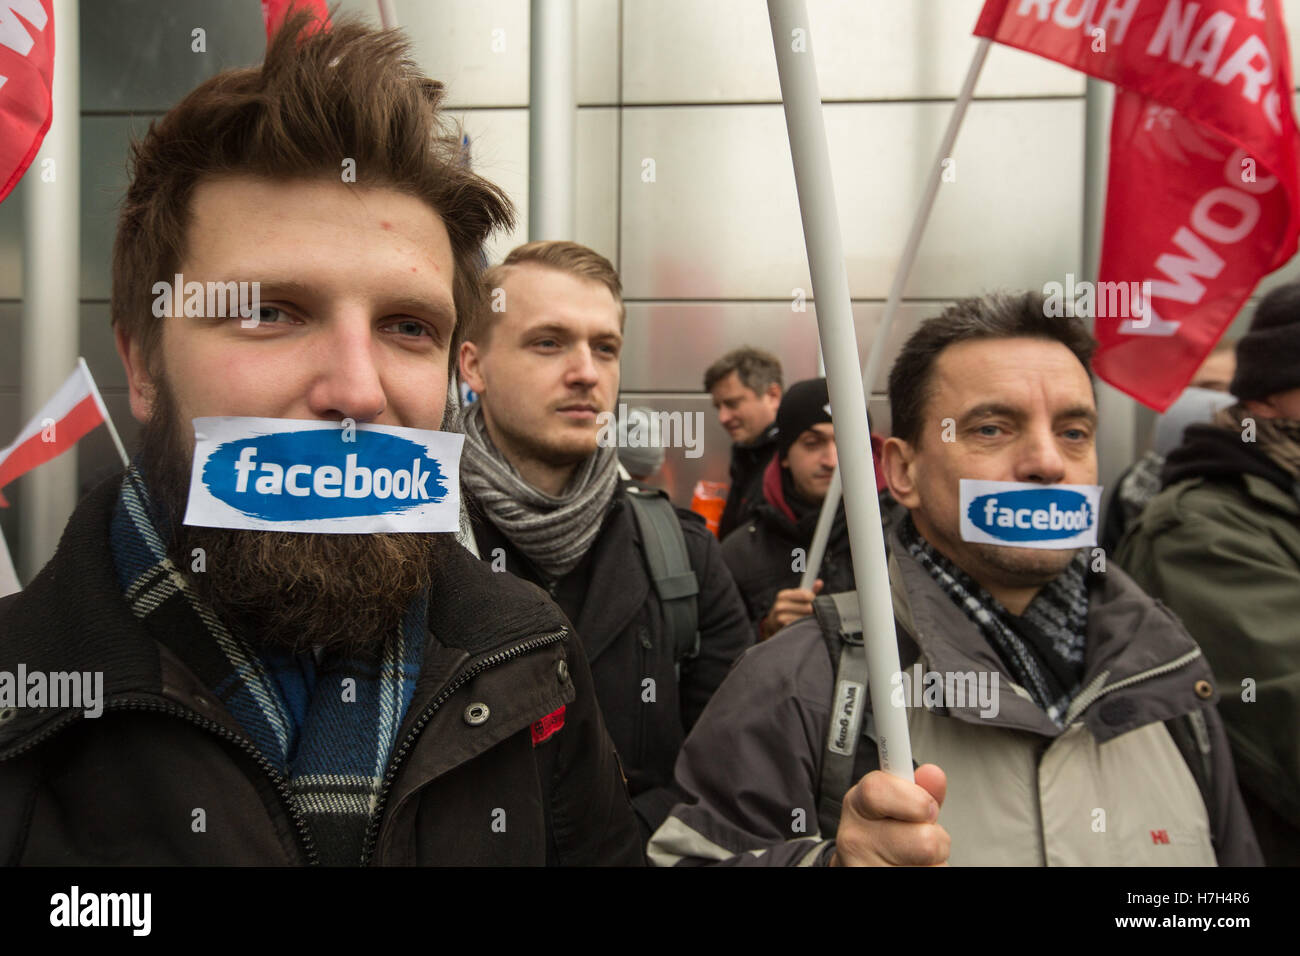 Warsaw, Poland. 05th Nov, 2016. On 5. November 2016 Nationalists from ONR (Oboz Narodowy Radikalny) and other groups protest in Polands capital Warsaw in front of Facebooks office against alledged censorship of nationalists accounts and pages on facebook - NO WIRE SERVICE- Credit:  dpa/Alamy Live News Stock Photo